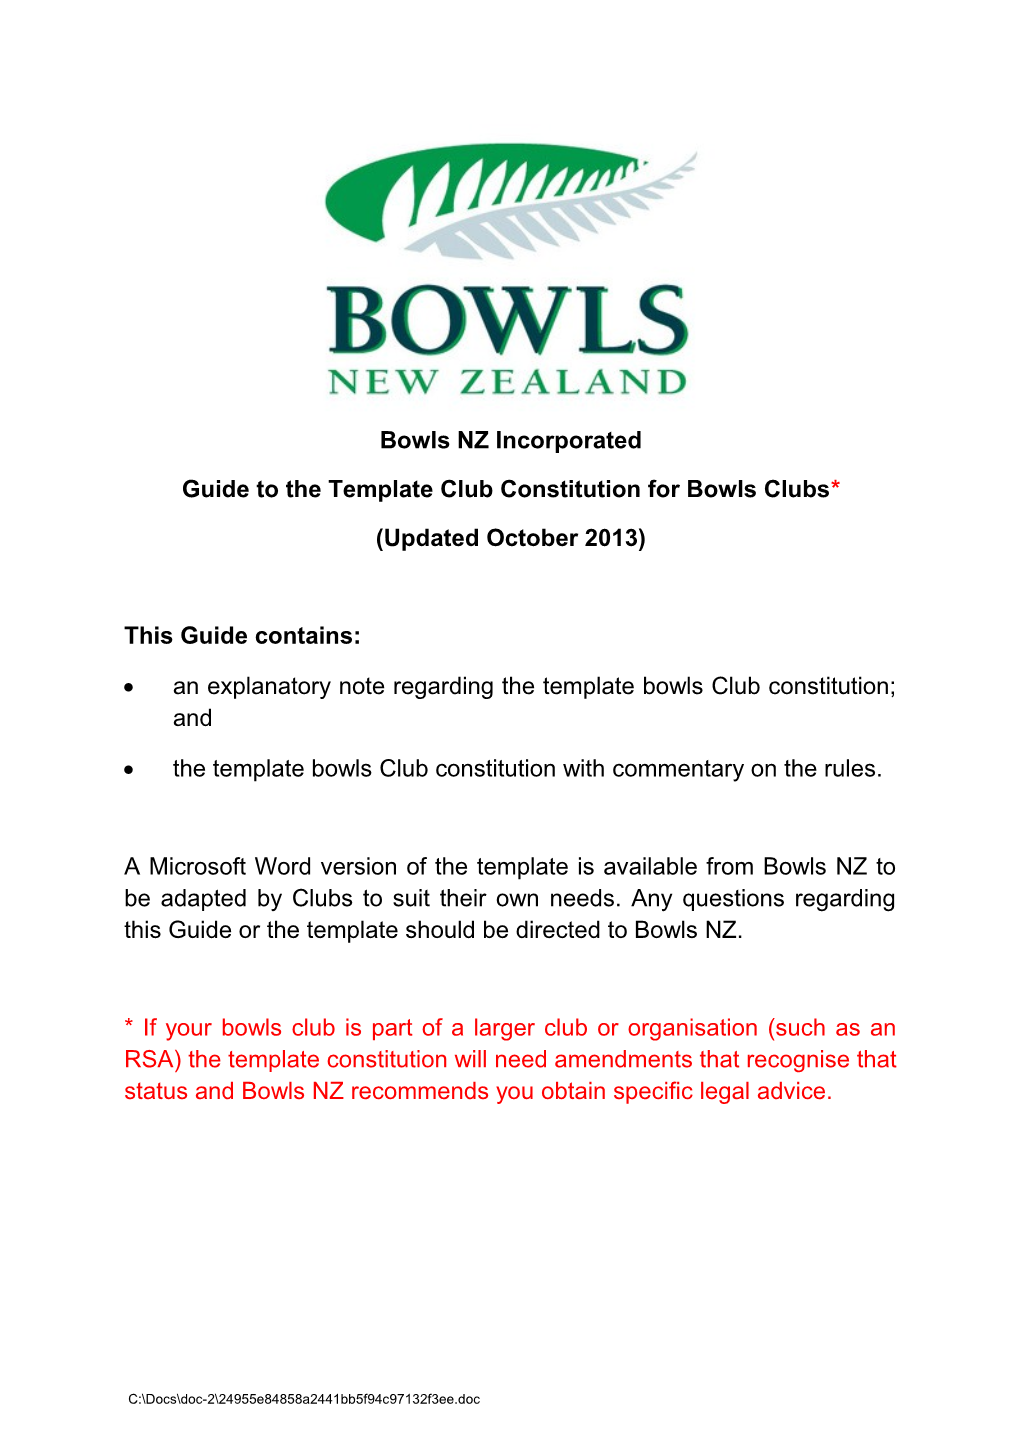 Guide to the Template Club Constitutionfor Bowls Clubs*